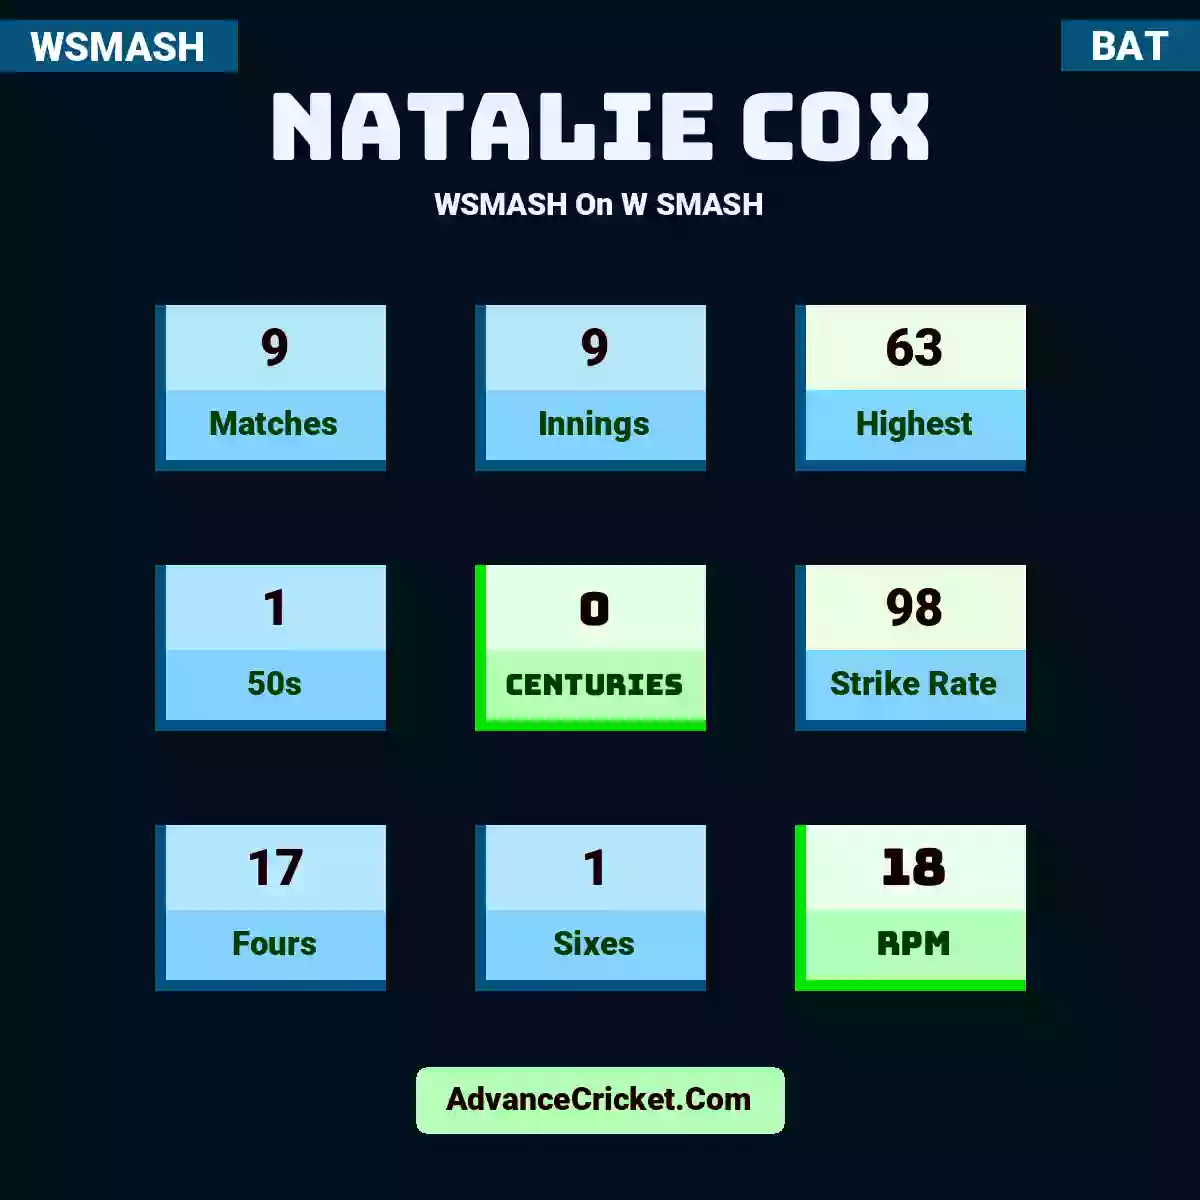 Natalie Cox WSMASH  On W SMASH, Natalie Cox played 9 matches, scored 63 runs as highest, 1 half-centuries, and 0 centuries, with a strike rate of 98. N.Cox hit 17 fours and 1 sixes, with an RPM of 18.